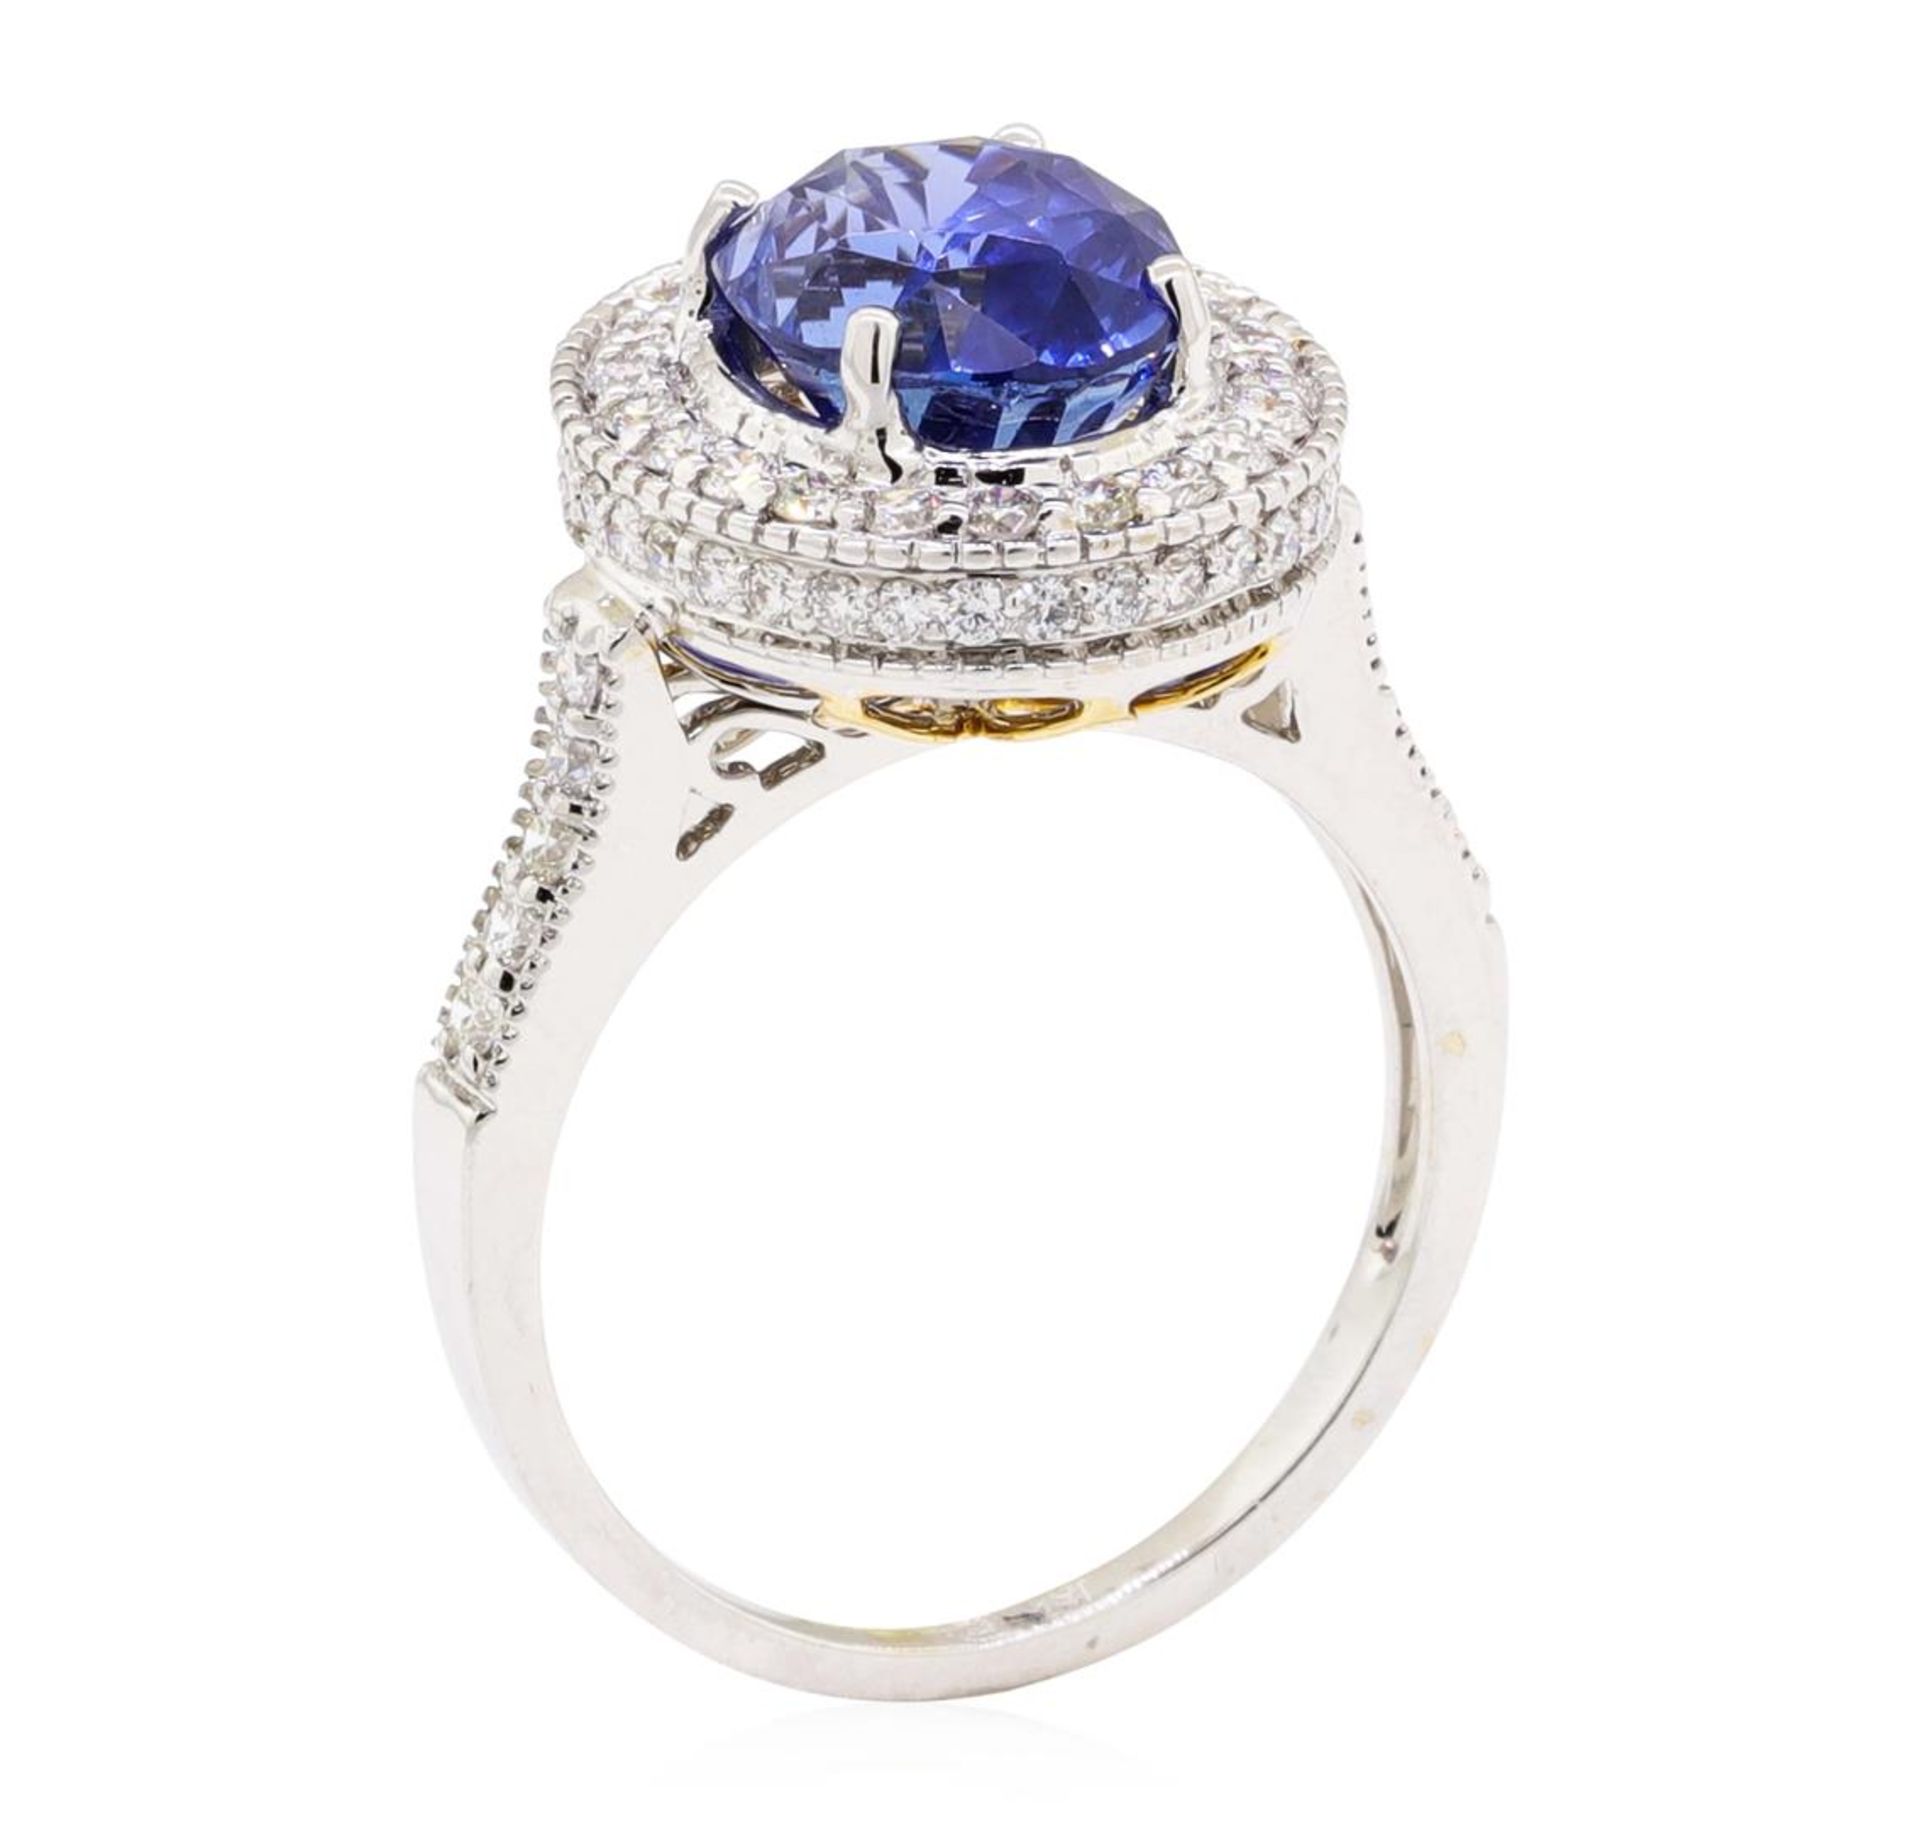 5.17 ctw Oval Mixed Blue Sapphire And Round Brilliant Cut Diamond Ring - 18KT Wh - Image 4 of 5